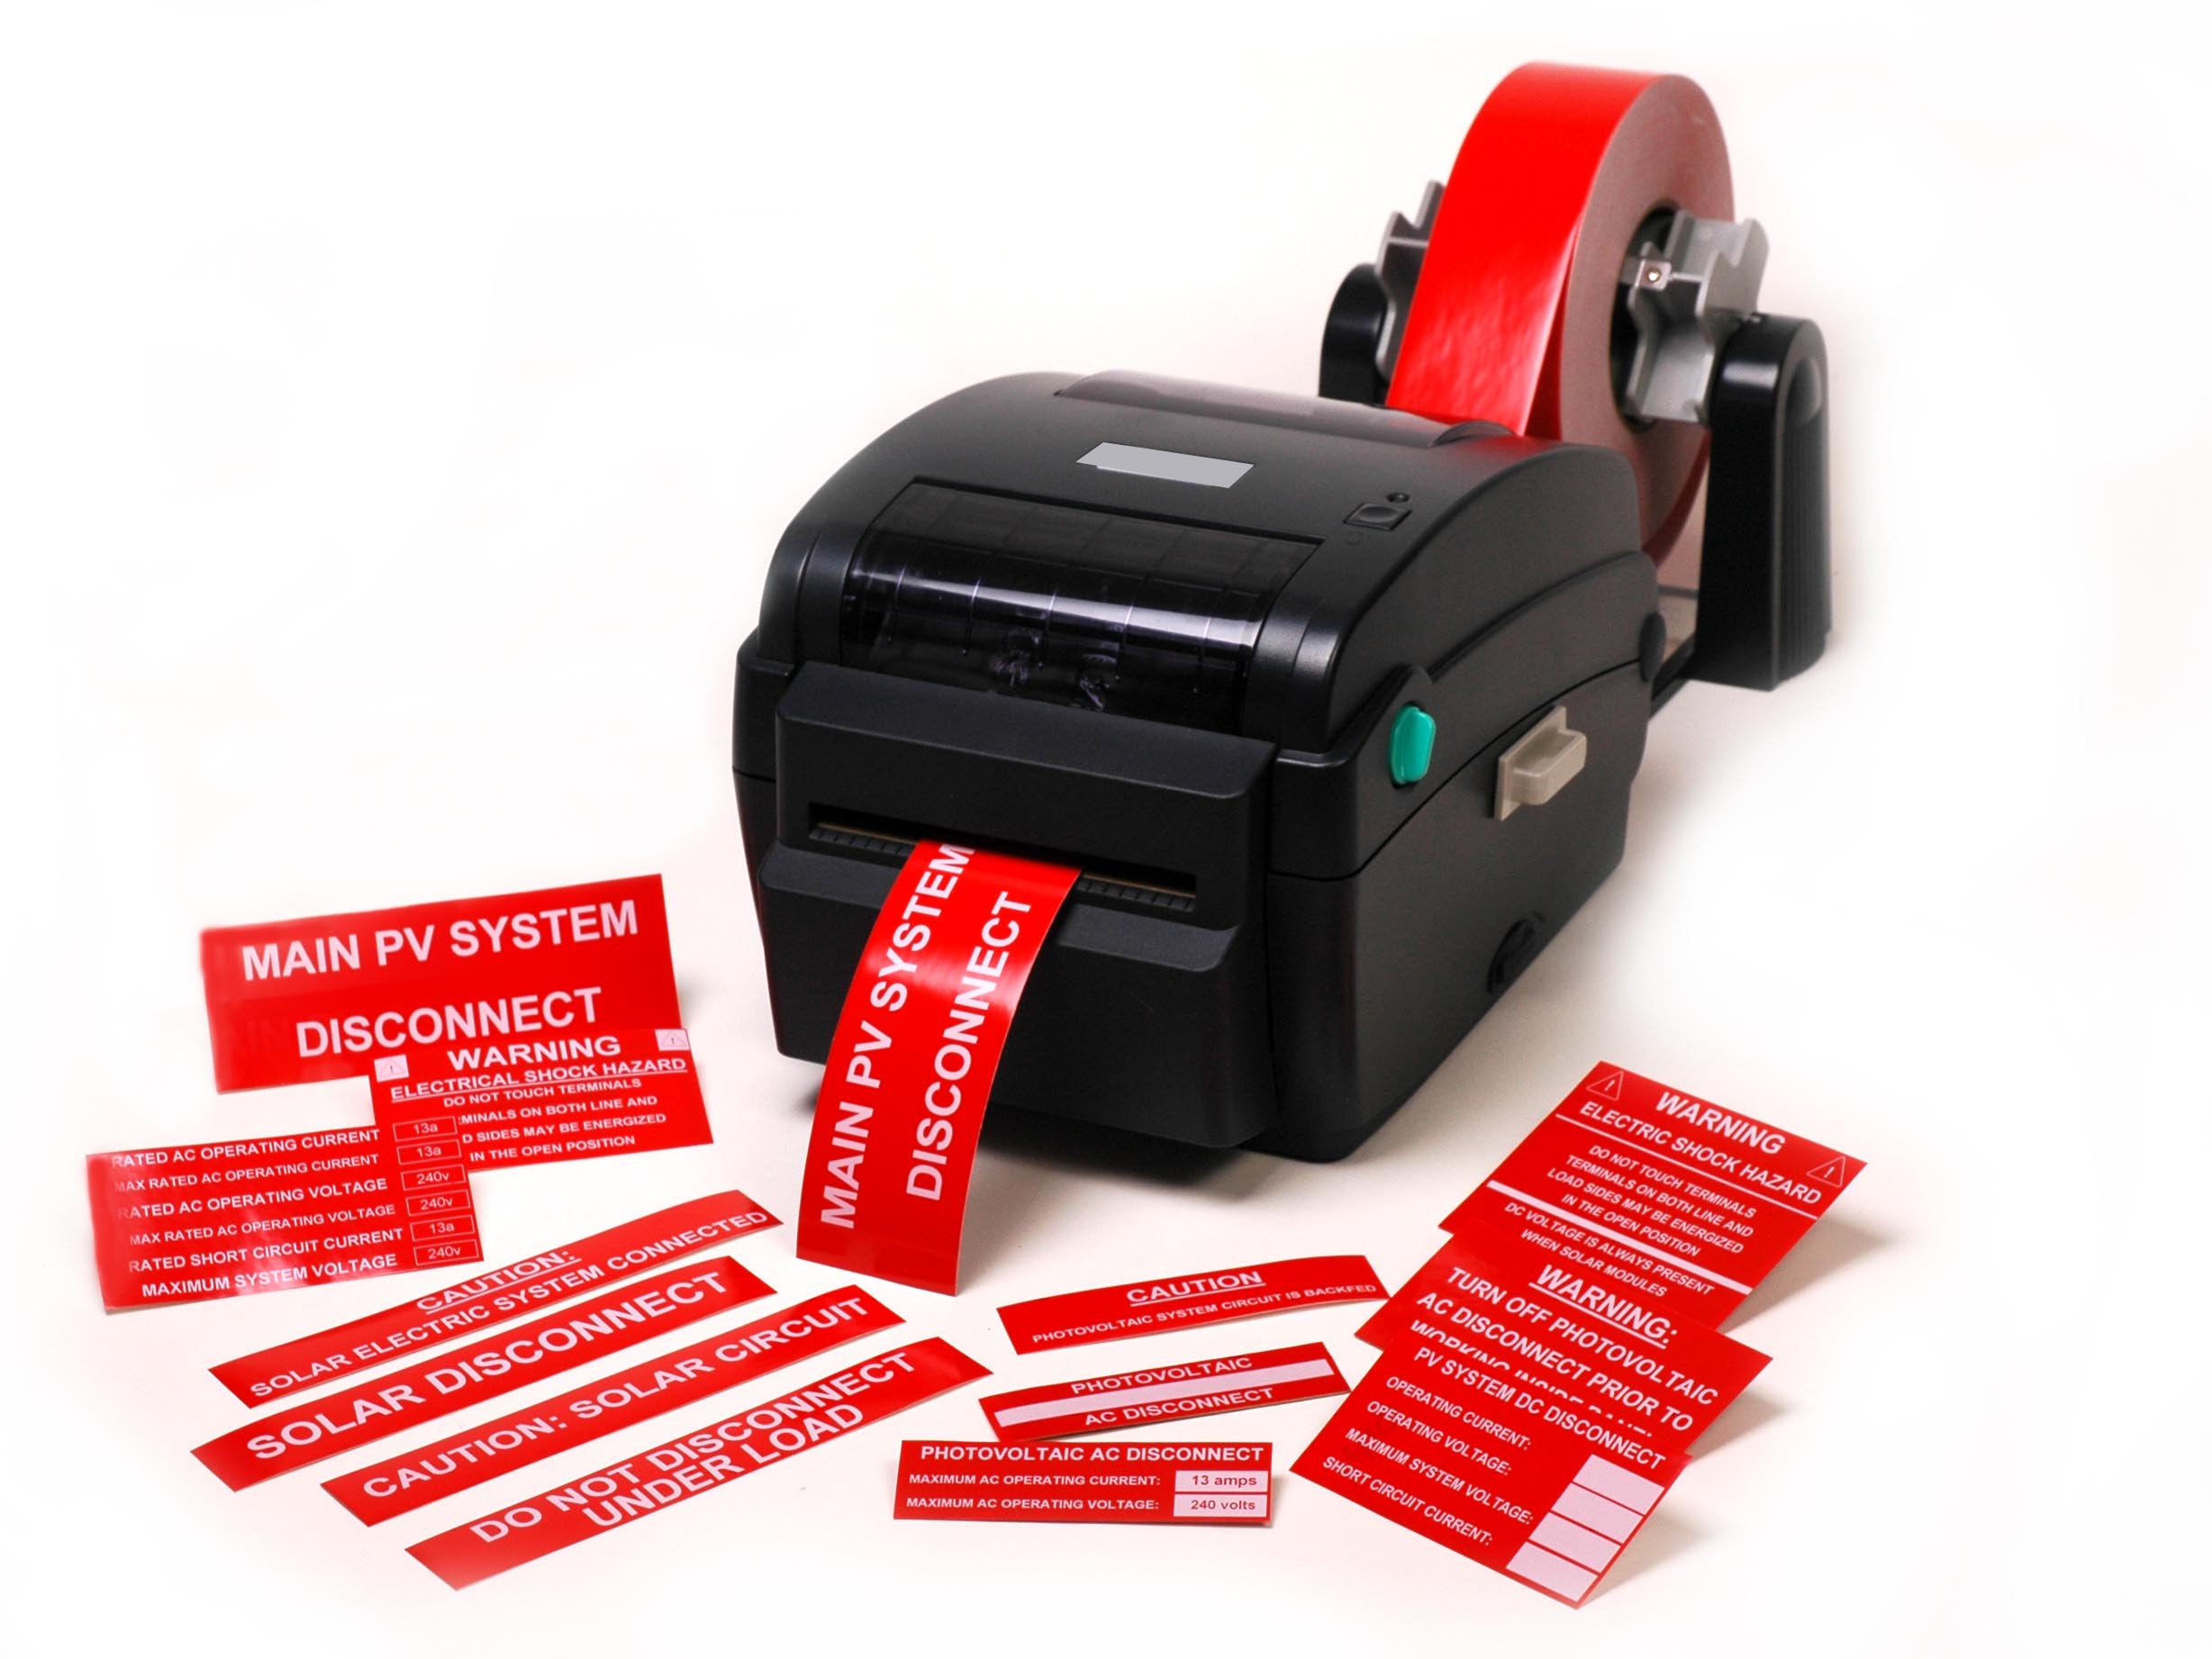 Tag printer Point of Sale hardware allows you to enter merchandise information faster and more accurately.